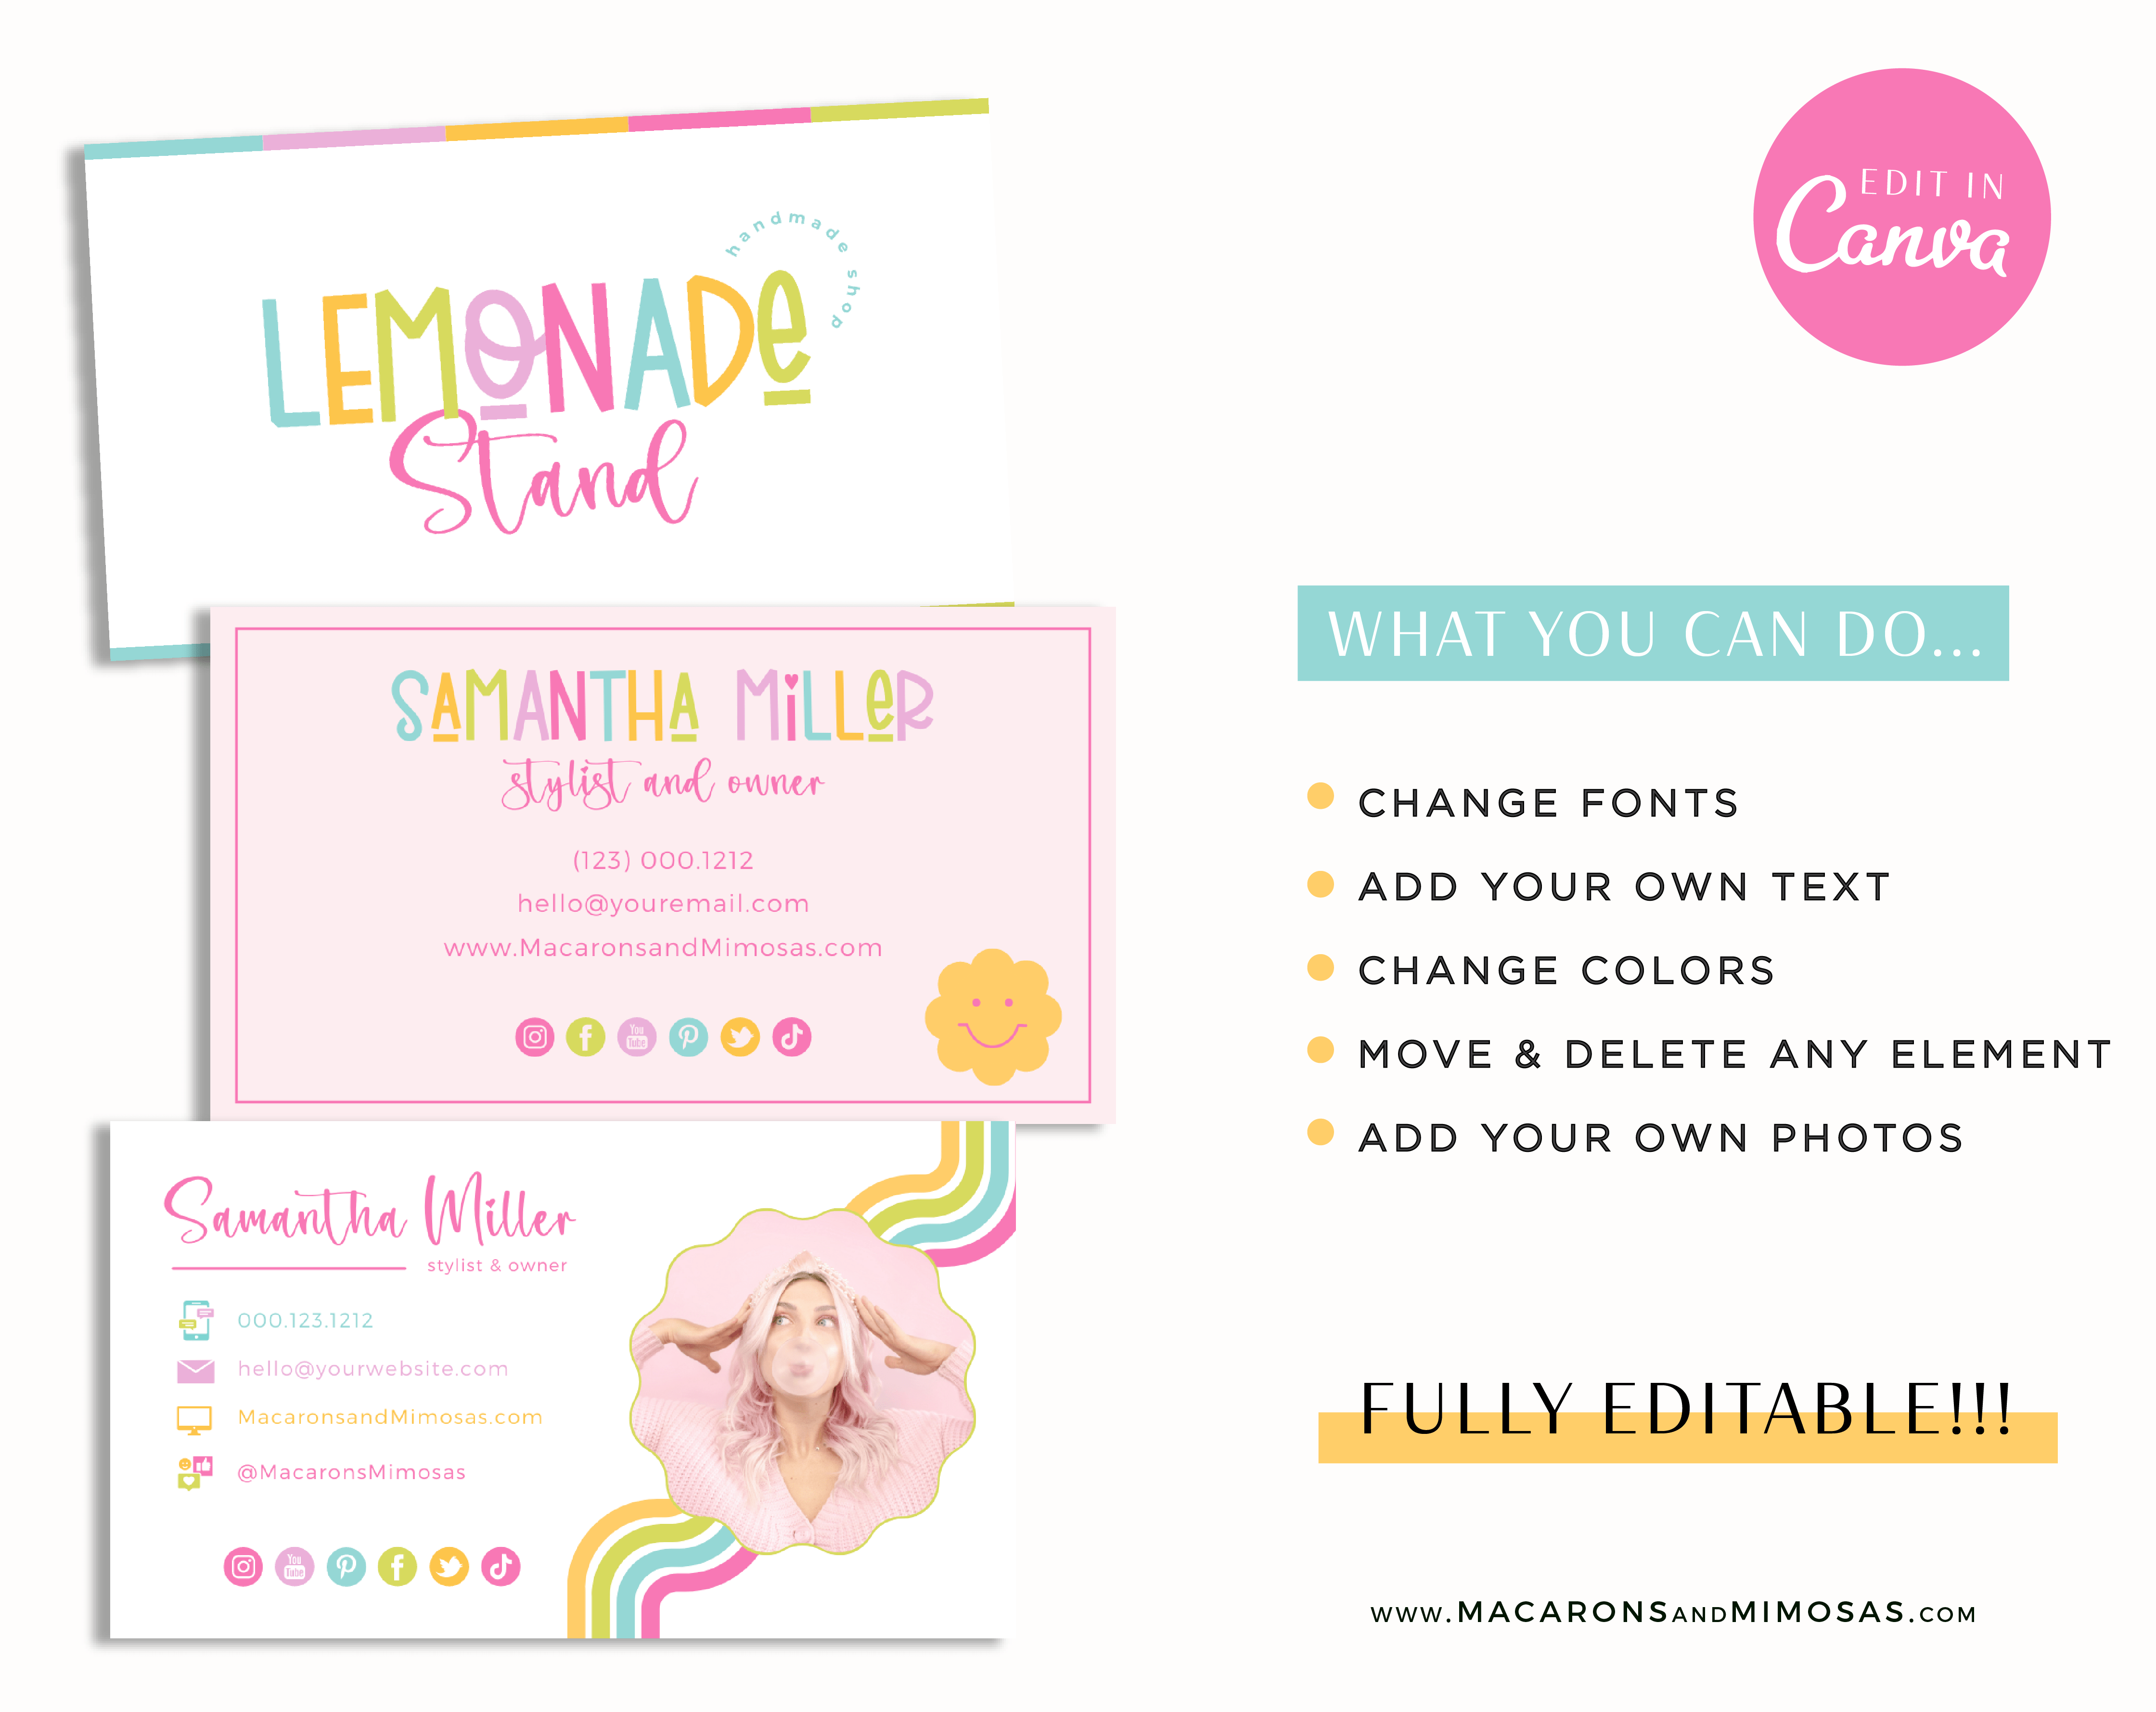 Bright Rainbow Retro Editable Business Card Template edit in Canva. Retro DIY business logo with stars and hearts in a bright colorful design.